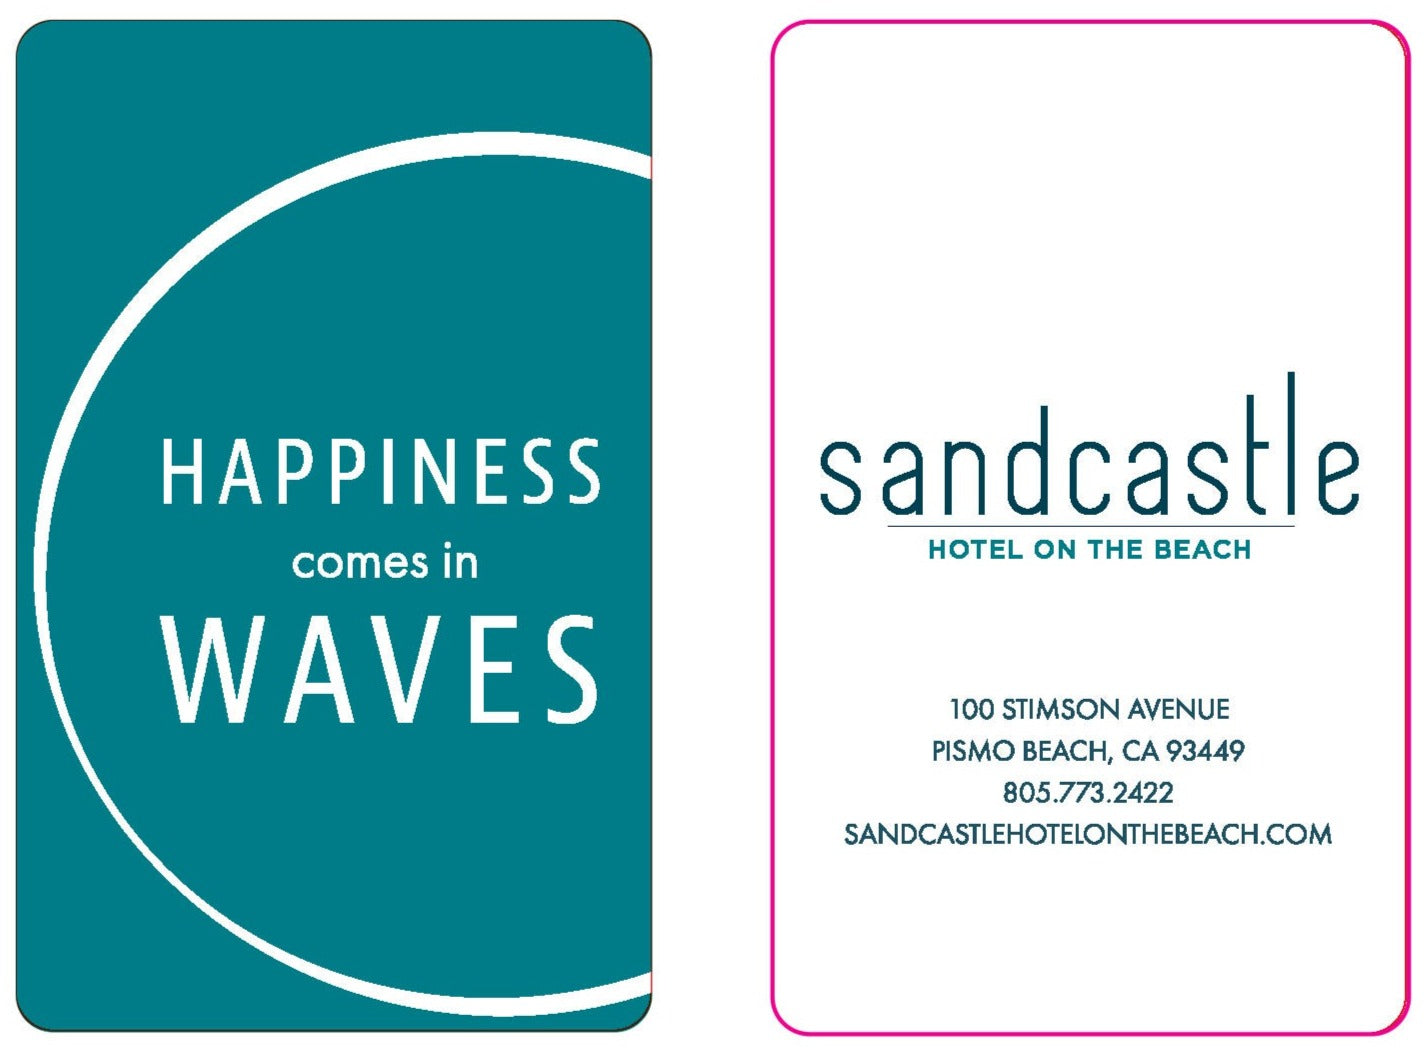 Sandcastle Happiness RFID Key Cards Teal (500 cards per box / $160 per box)